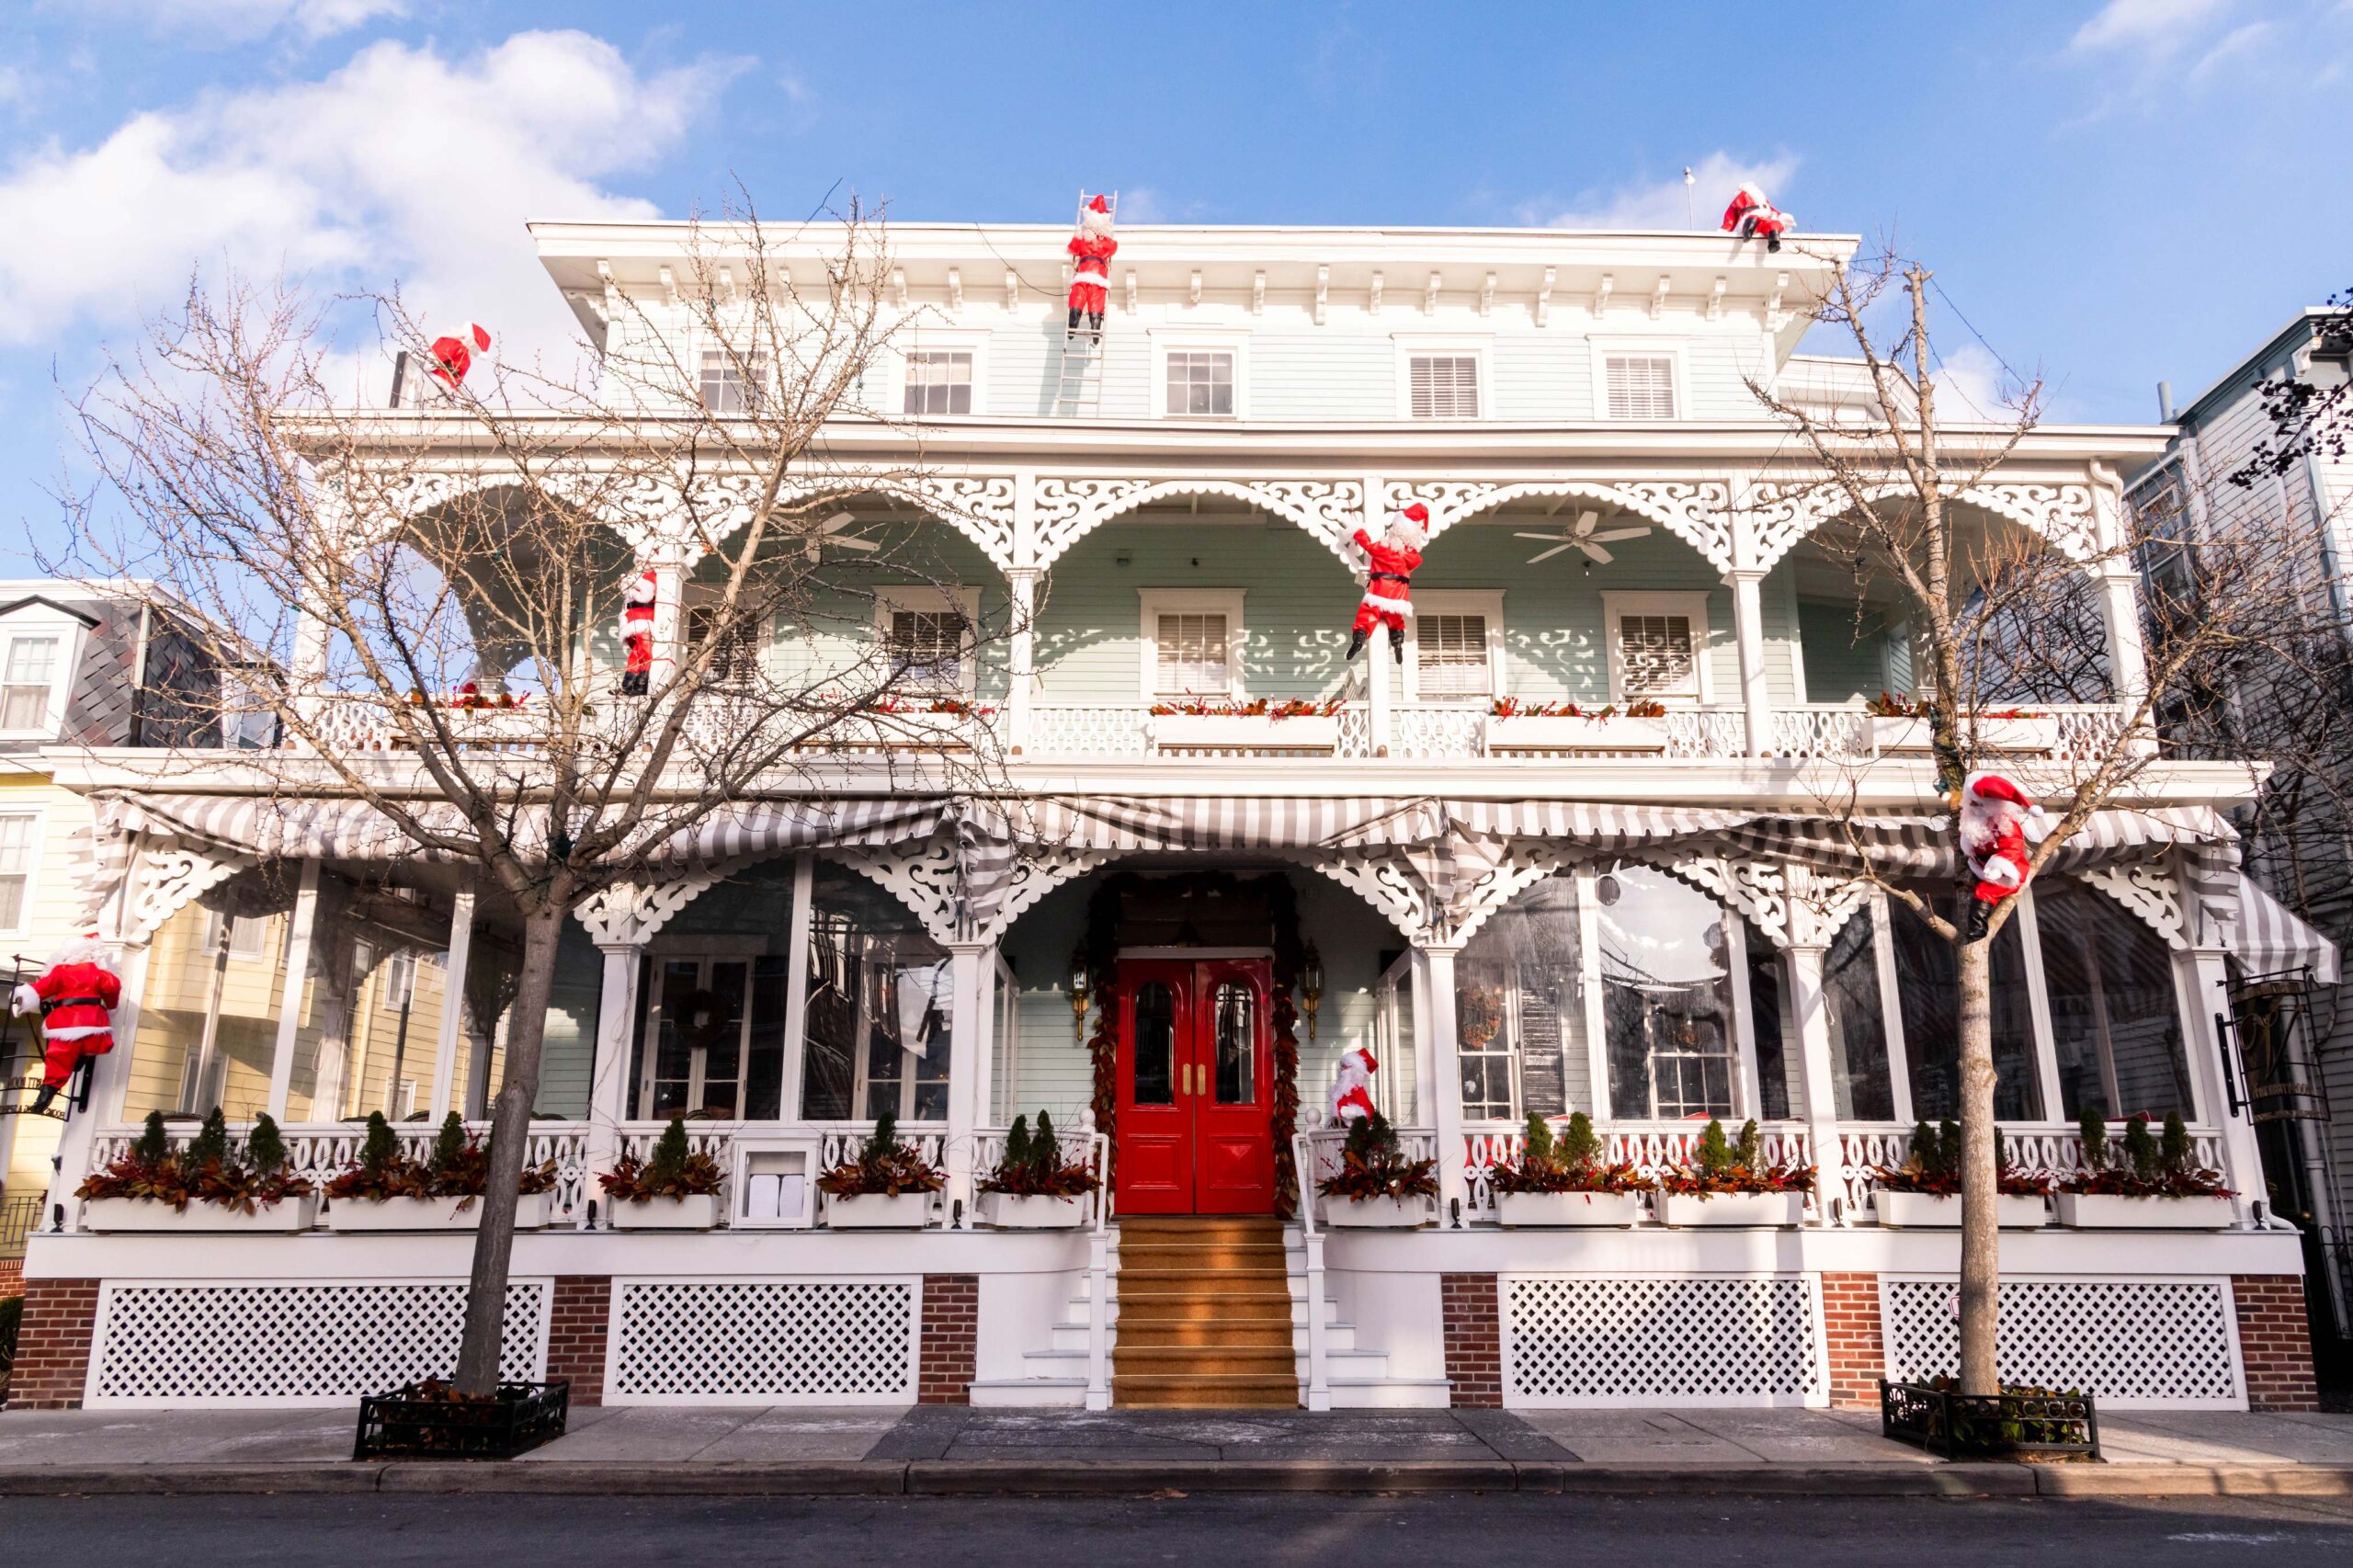 Santa's climbing on porch railings and on the roof of Virginia Hotel, a pastel blue and white Victorian bed and breakfast. The sky is blue with puffy white clouds and the sun is shining on the Virginia Hotel.